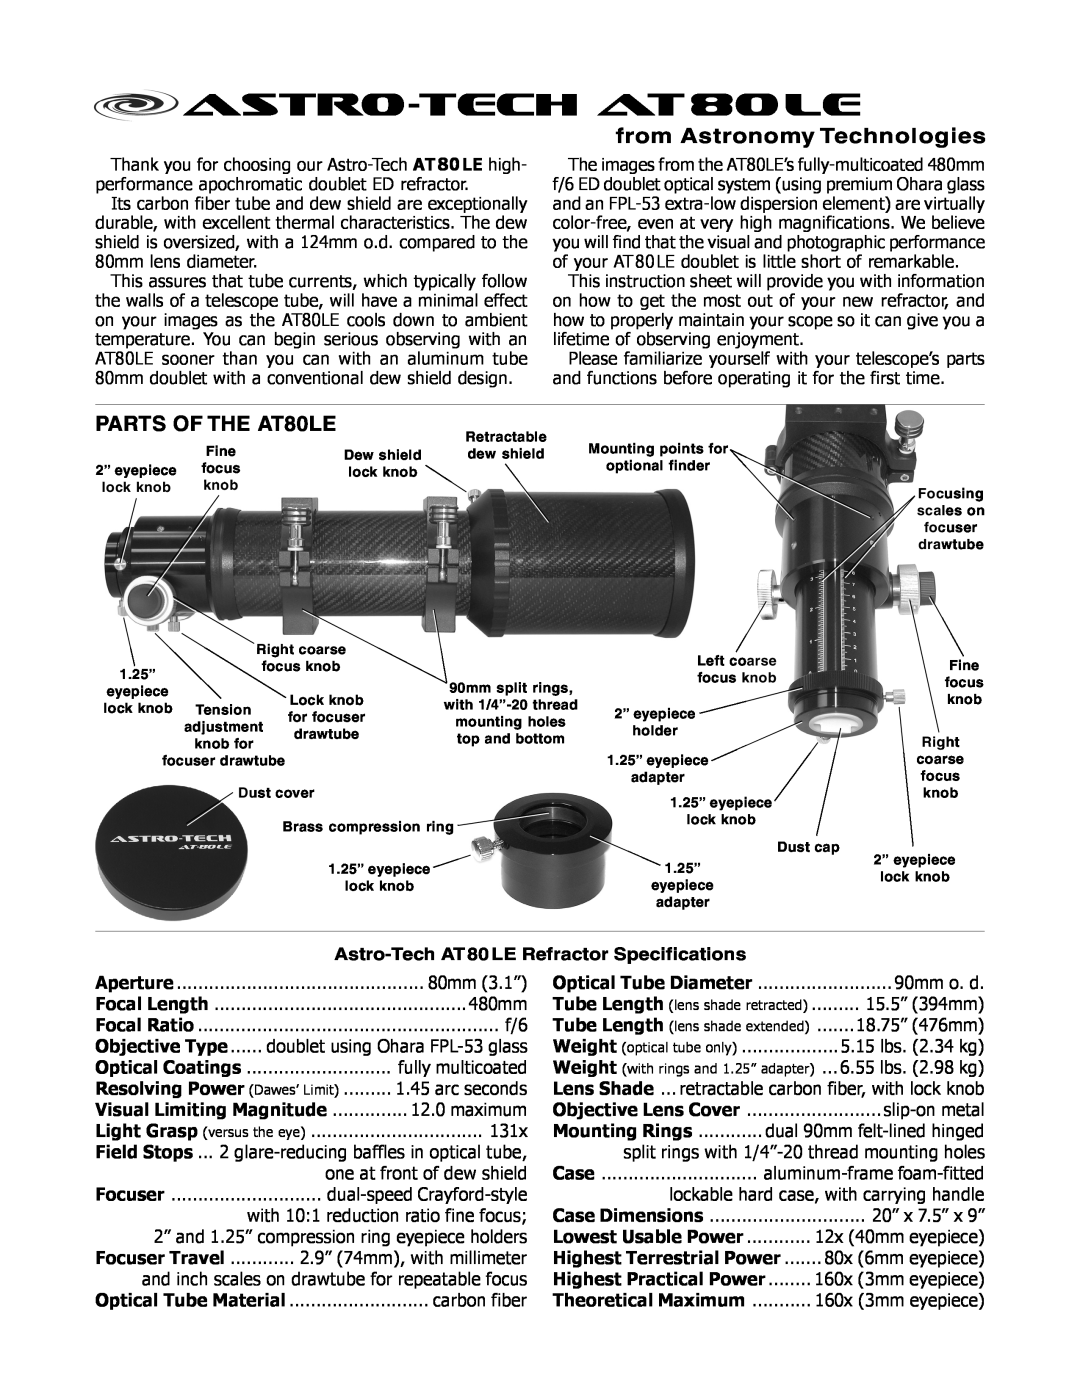 Meade instruction sheet Astro-Tech AT80LE Refractor Specifications, astro-tech AT80LE, from Astronomy Technologies 